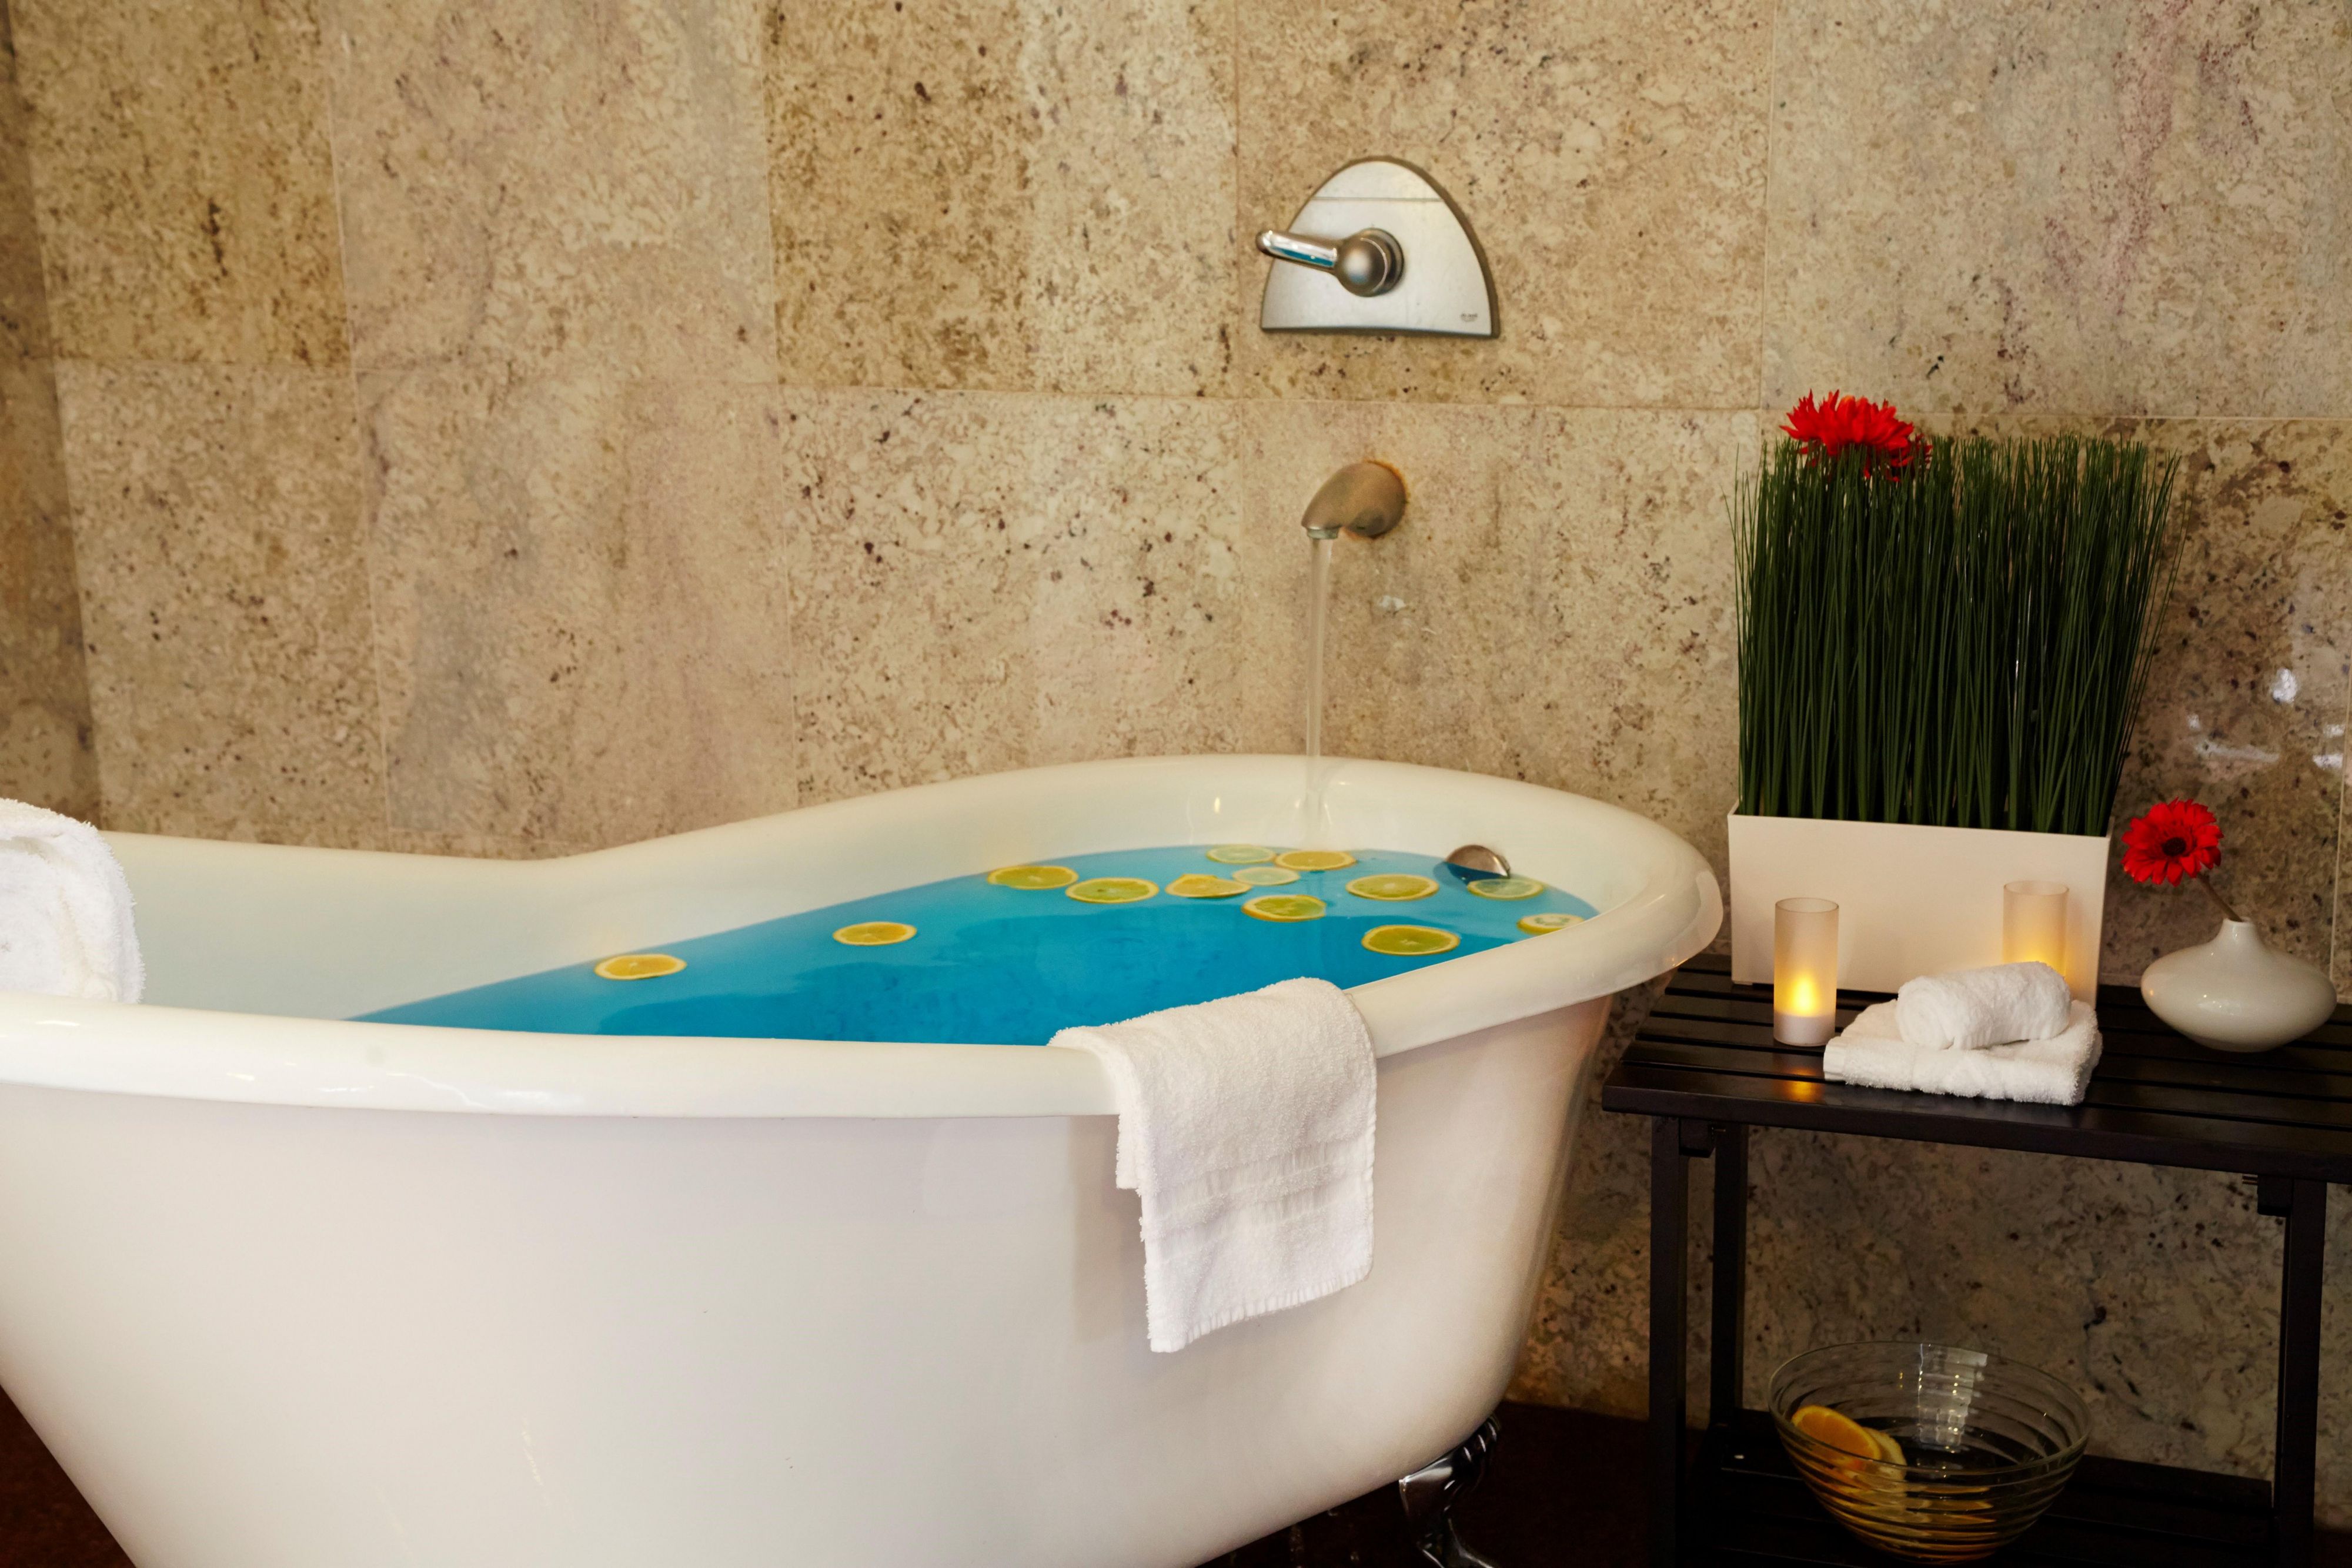 Relax in style at the Meridian Day Spa in the Crowne Plaza